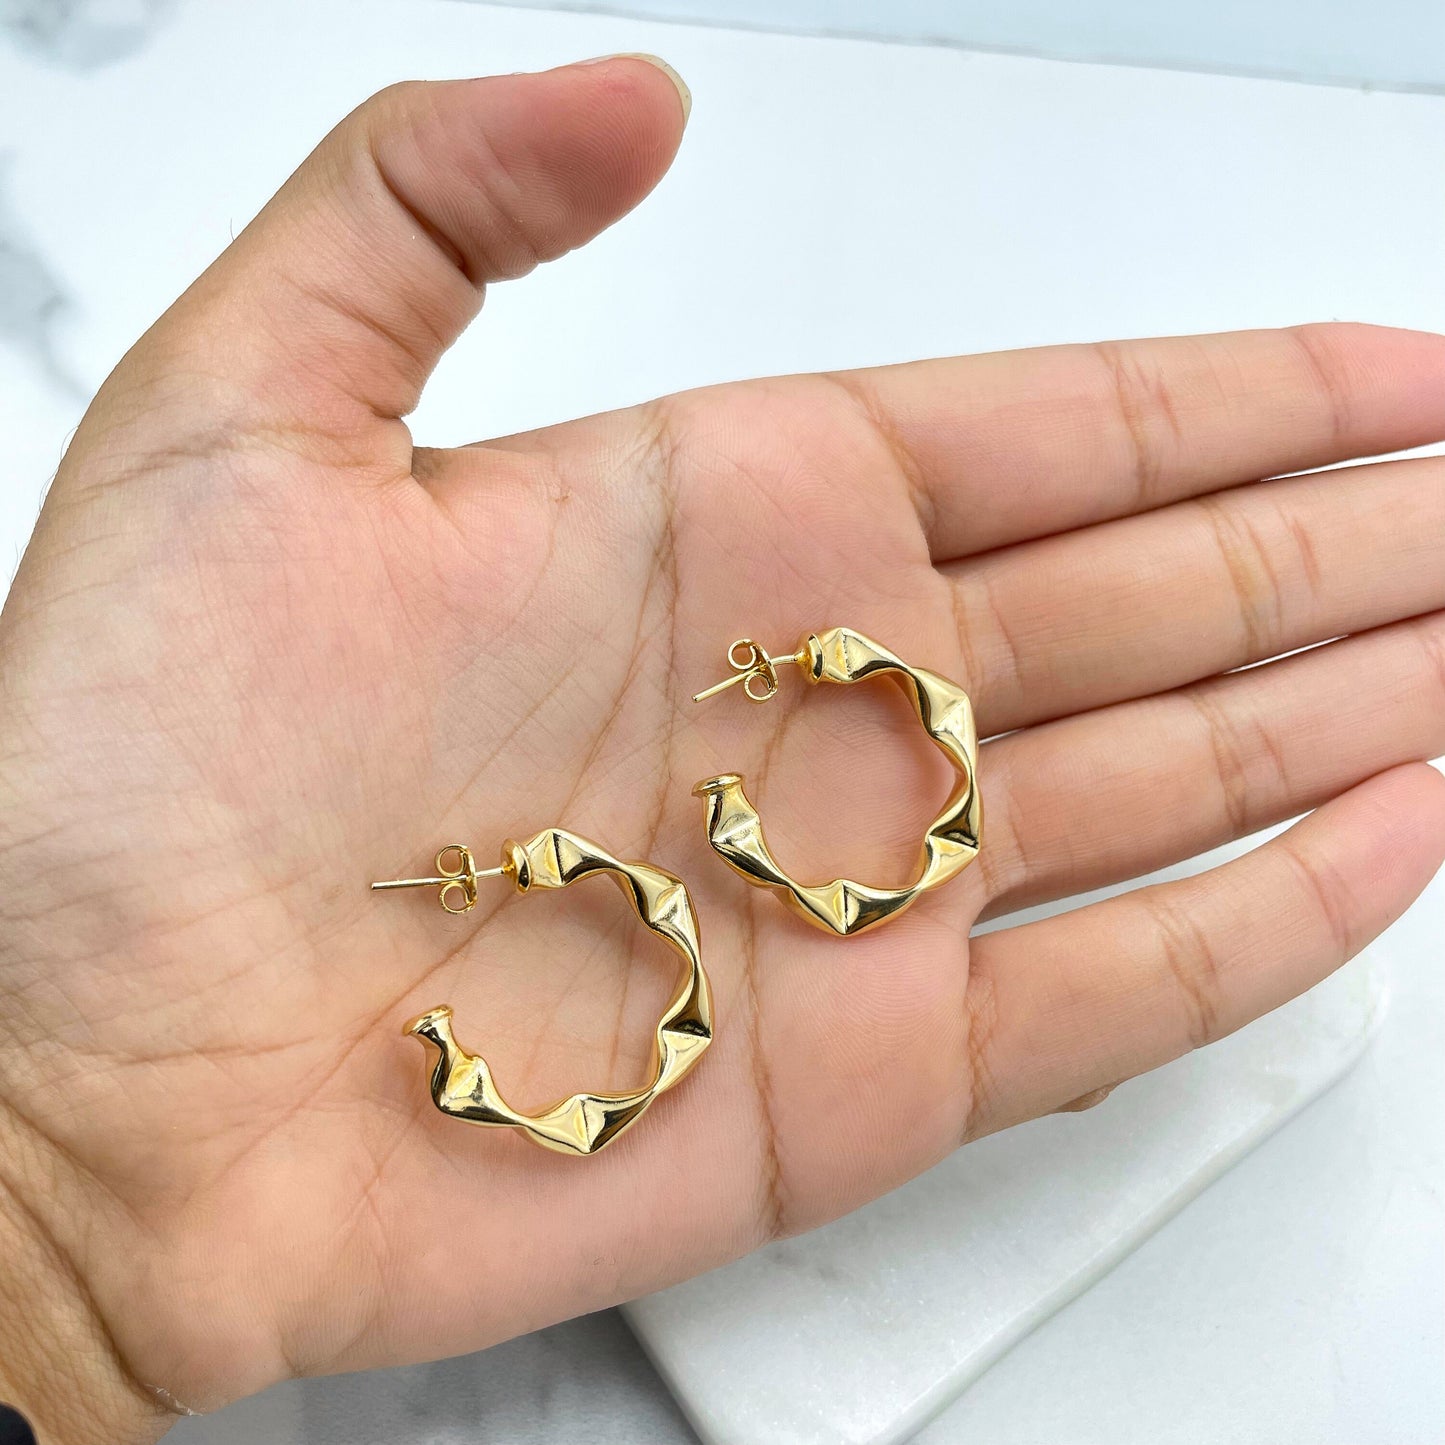 18k Gold Filled 28mm Classic & Modern Texturized Hoops Earrings Wholesale Jewelry Making Supplies